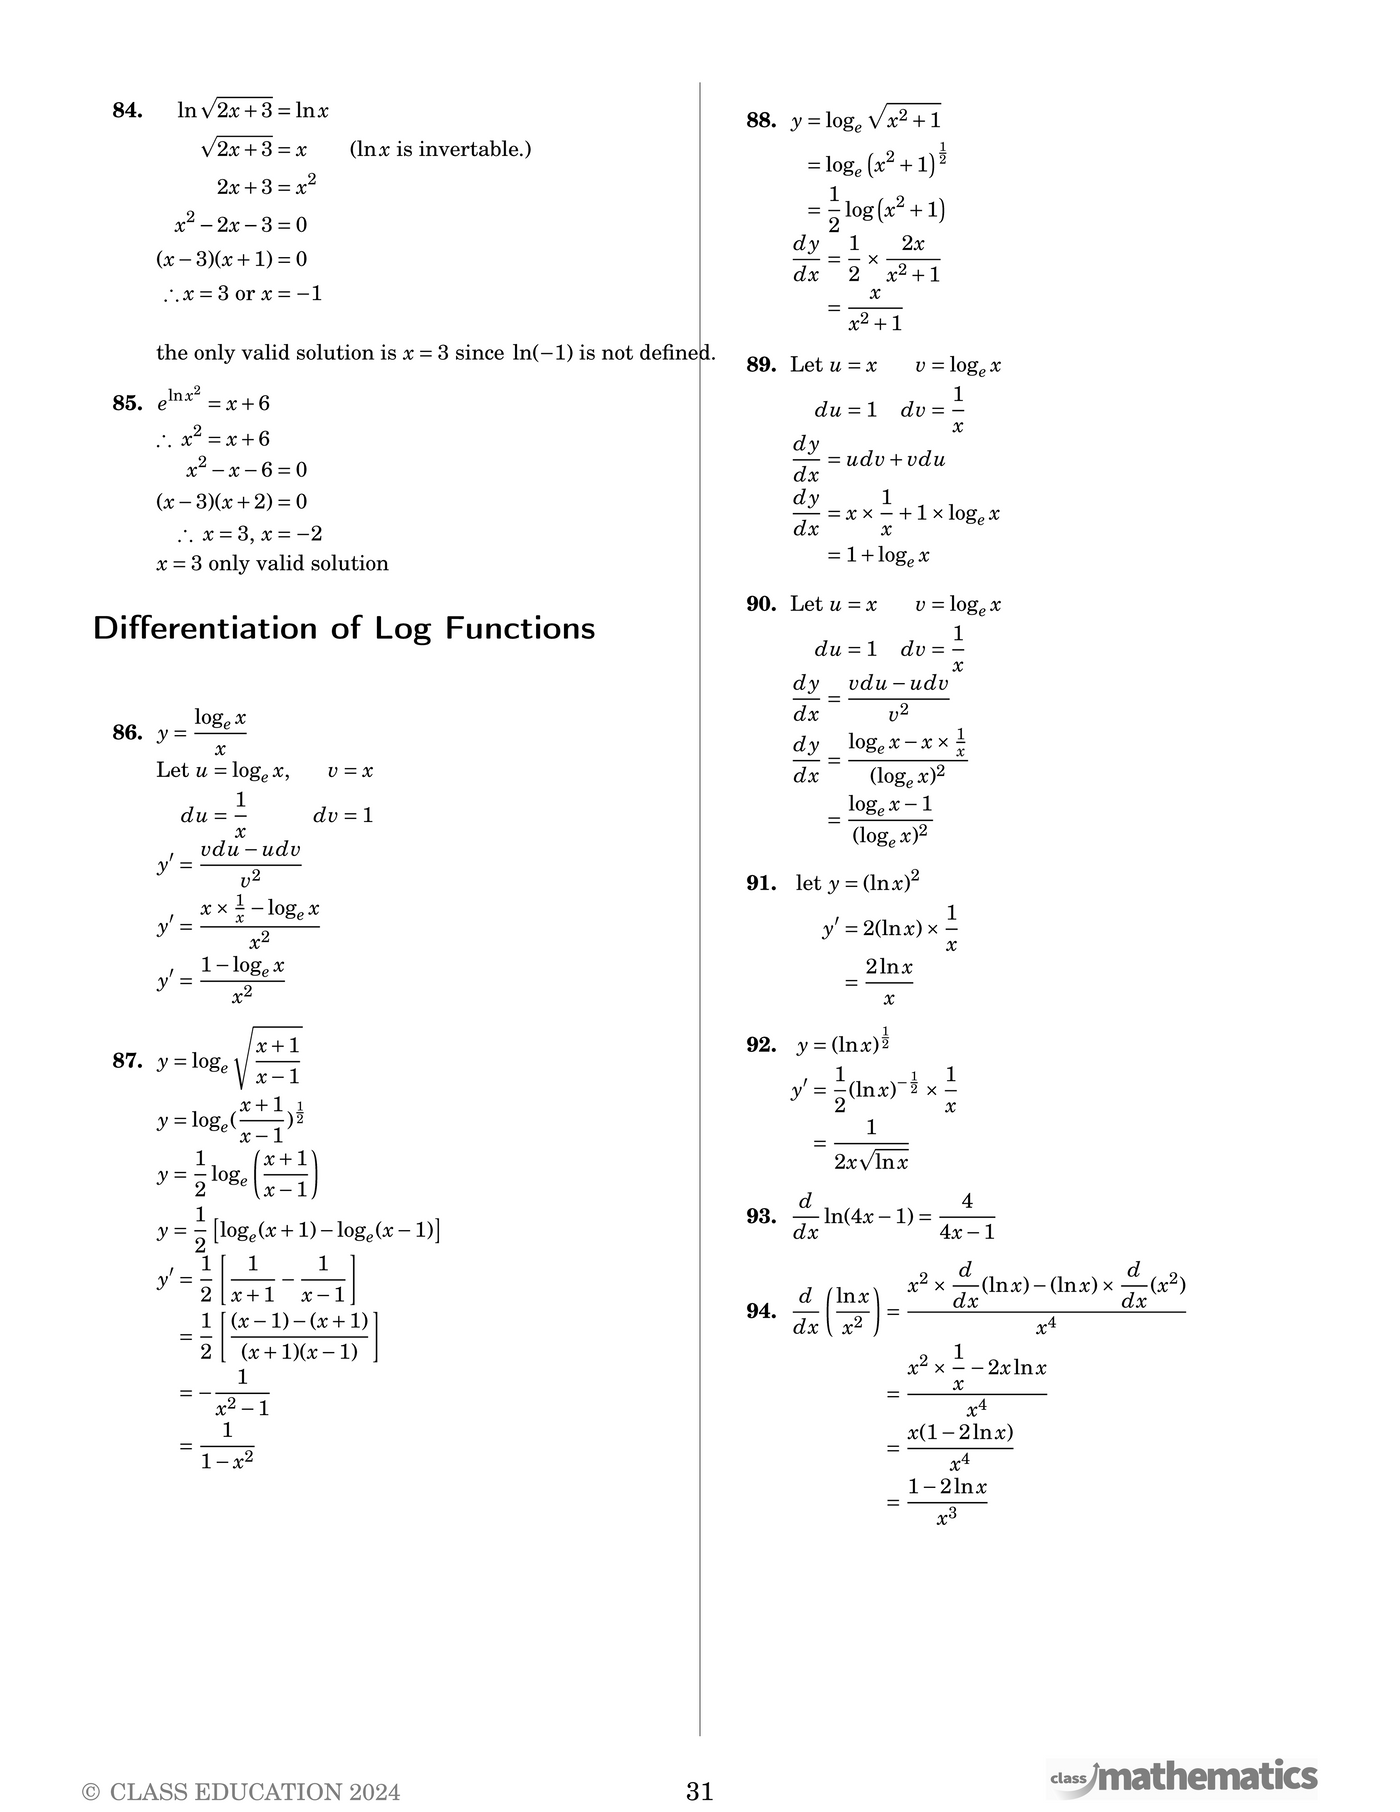 NSW Year 12 Maths Advanced - Exponential and Log Function